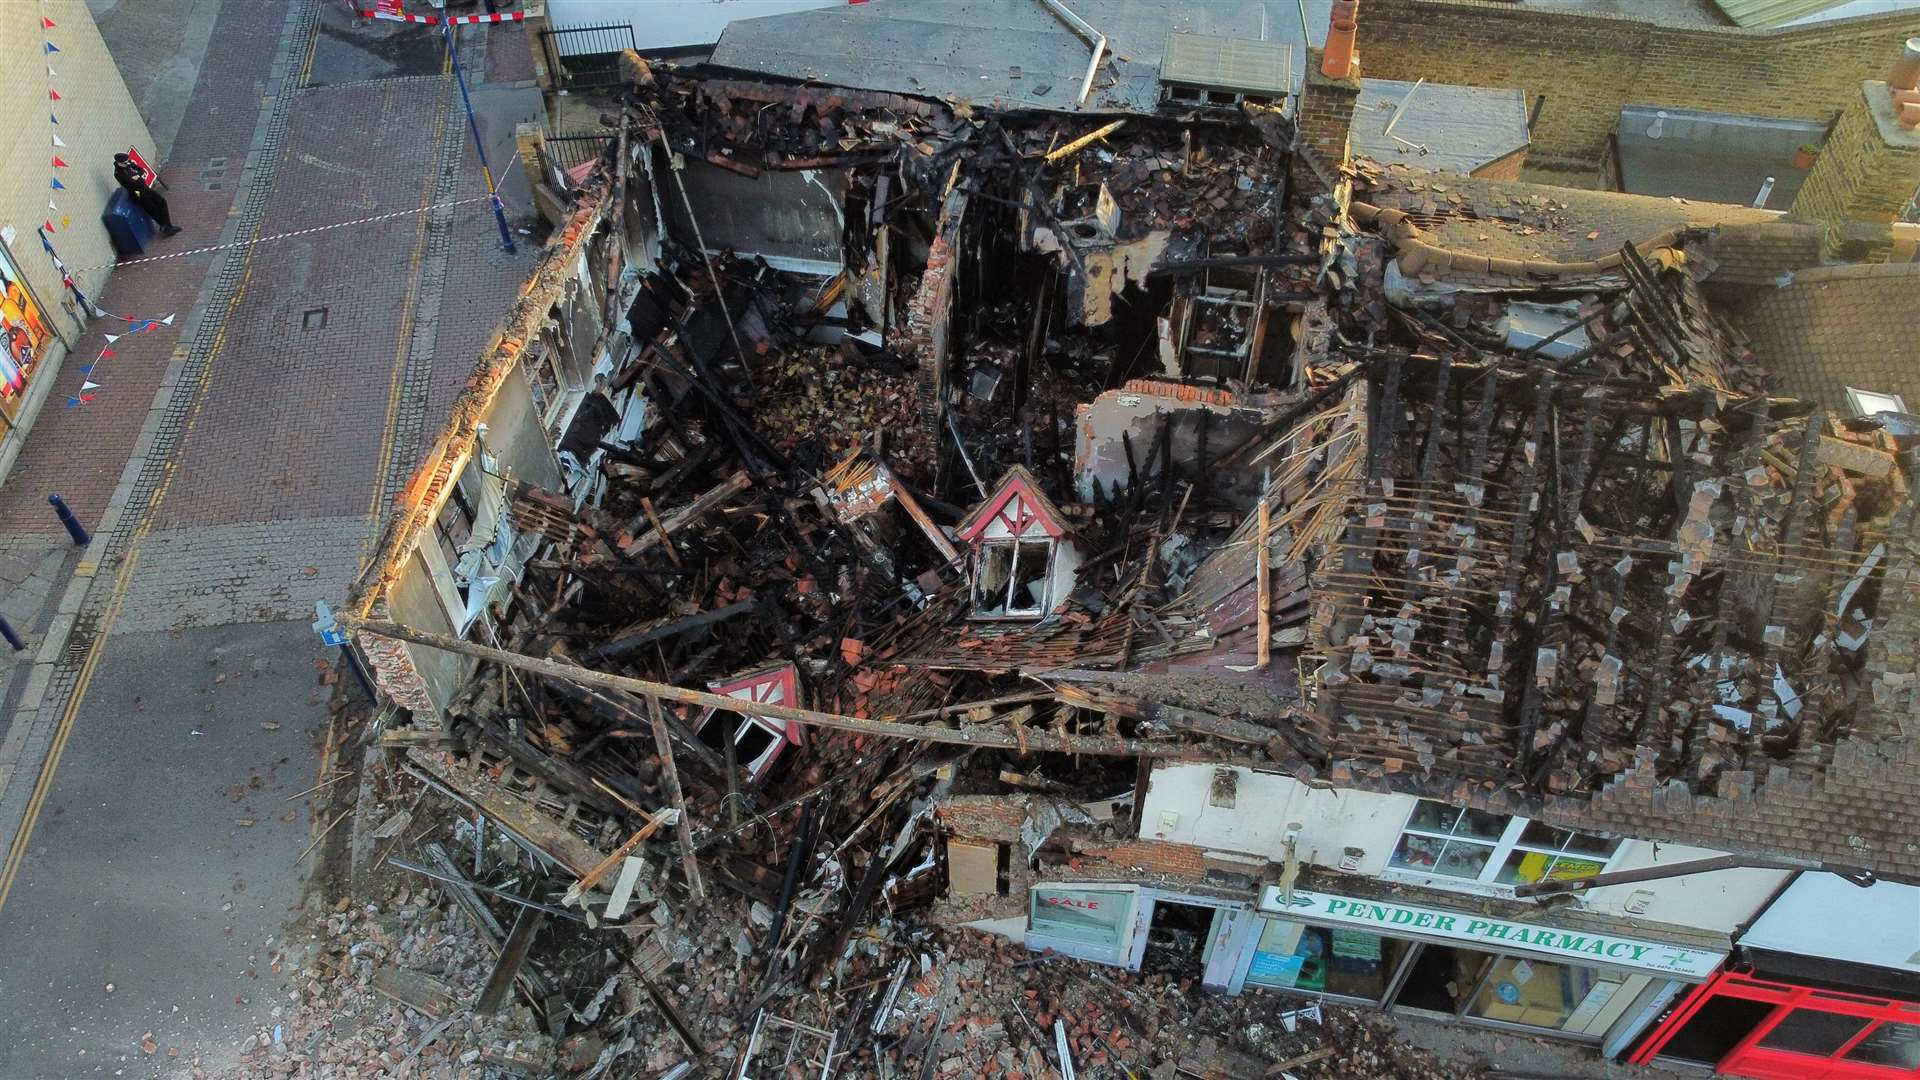 The remains on Friday, May 27 as the building collapsed into the street